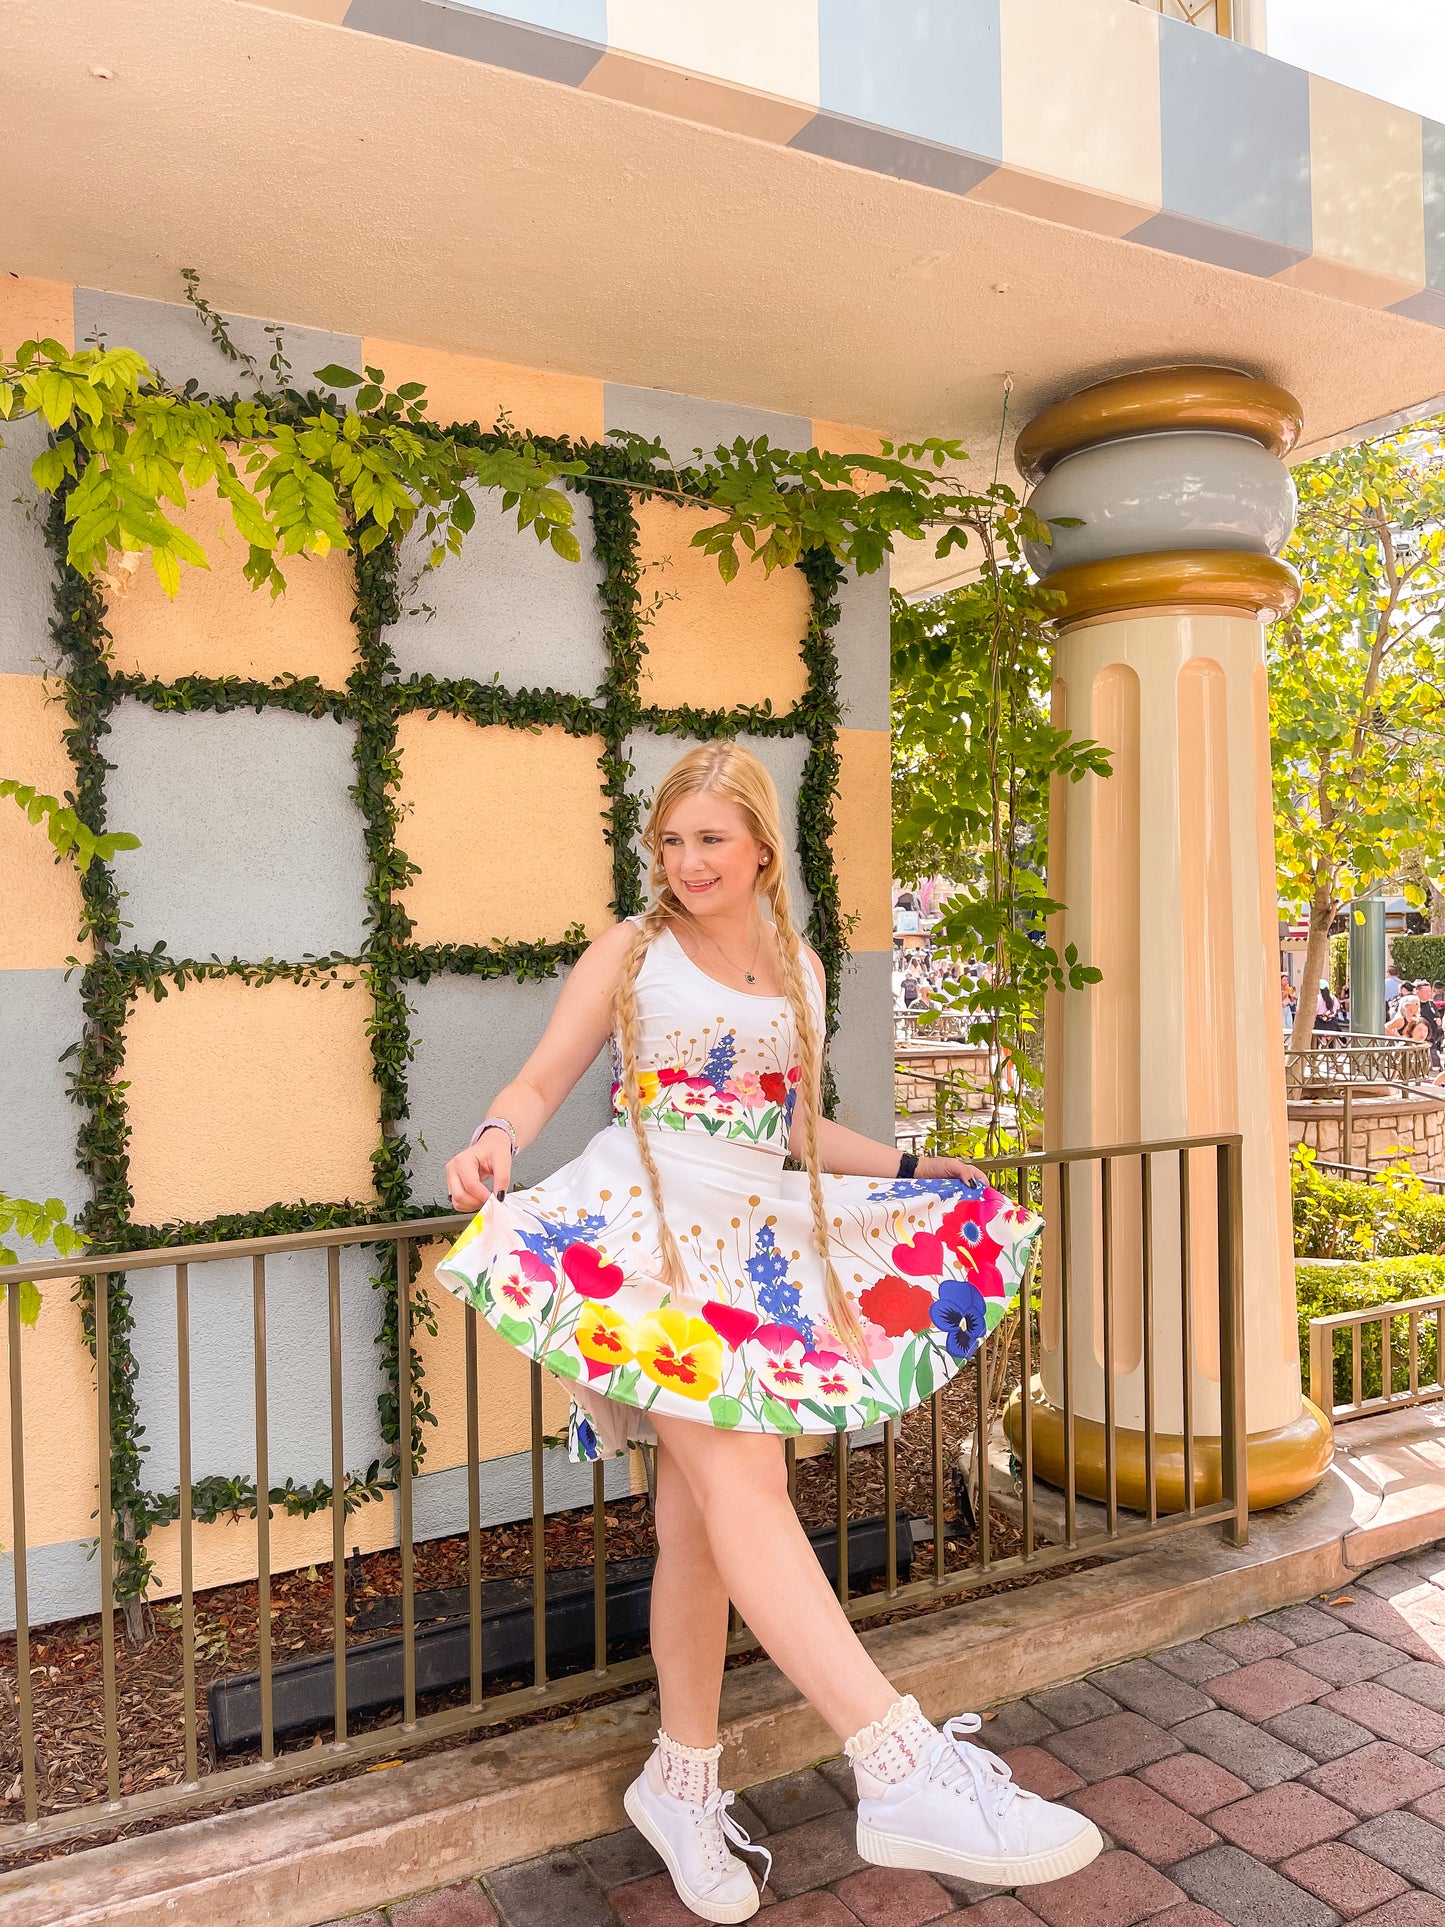 Our model wears a wonderland inspired ladies crop top outside of fantasyland at the famous Disneyland park. 